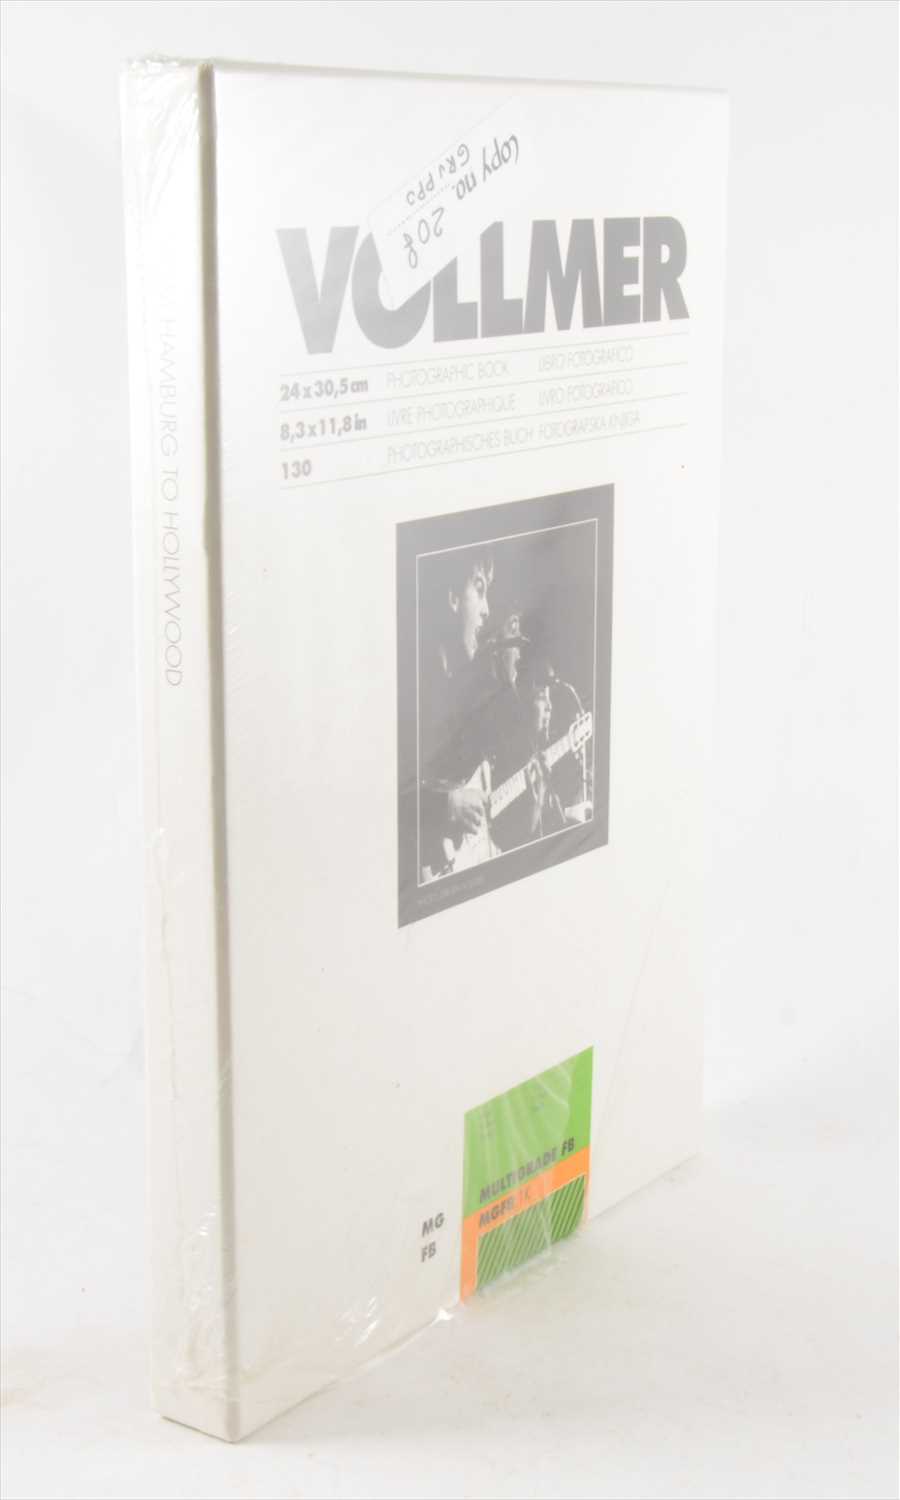 Lot 78 - JURGEN VOLLMER, From Hamburg to Hollywood, Genesis Publications, 1997, limited edition, number 208 of 1750, as published and packaged